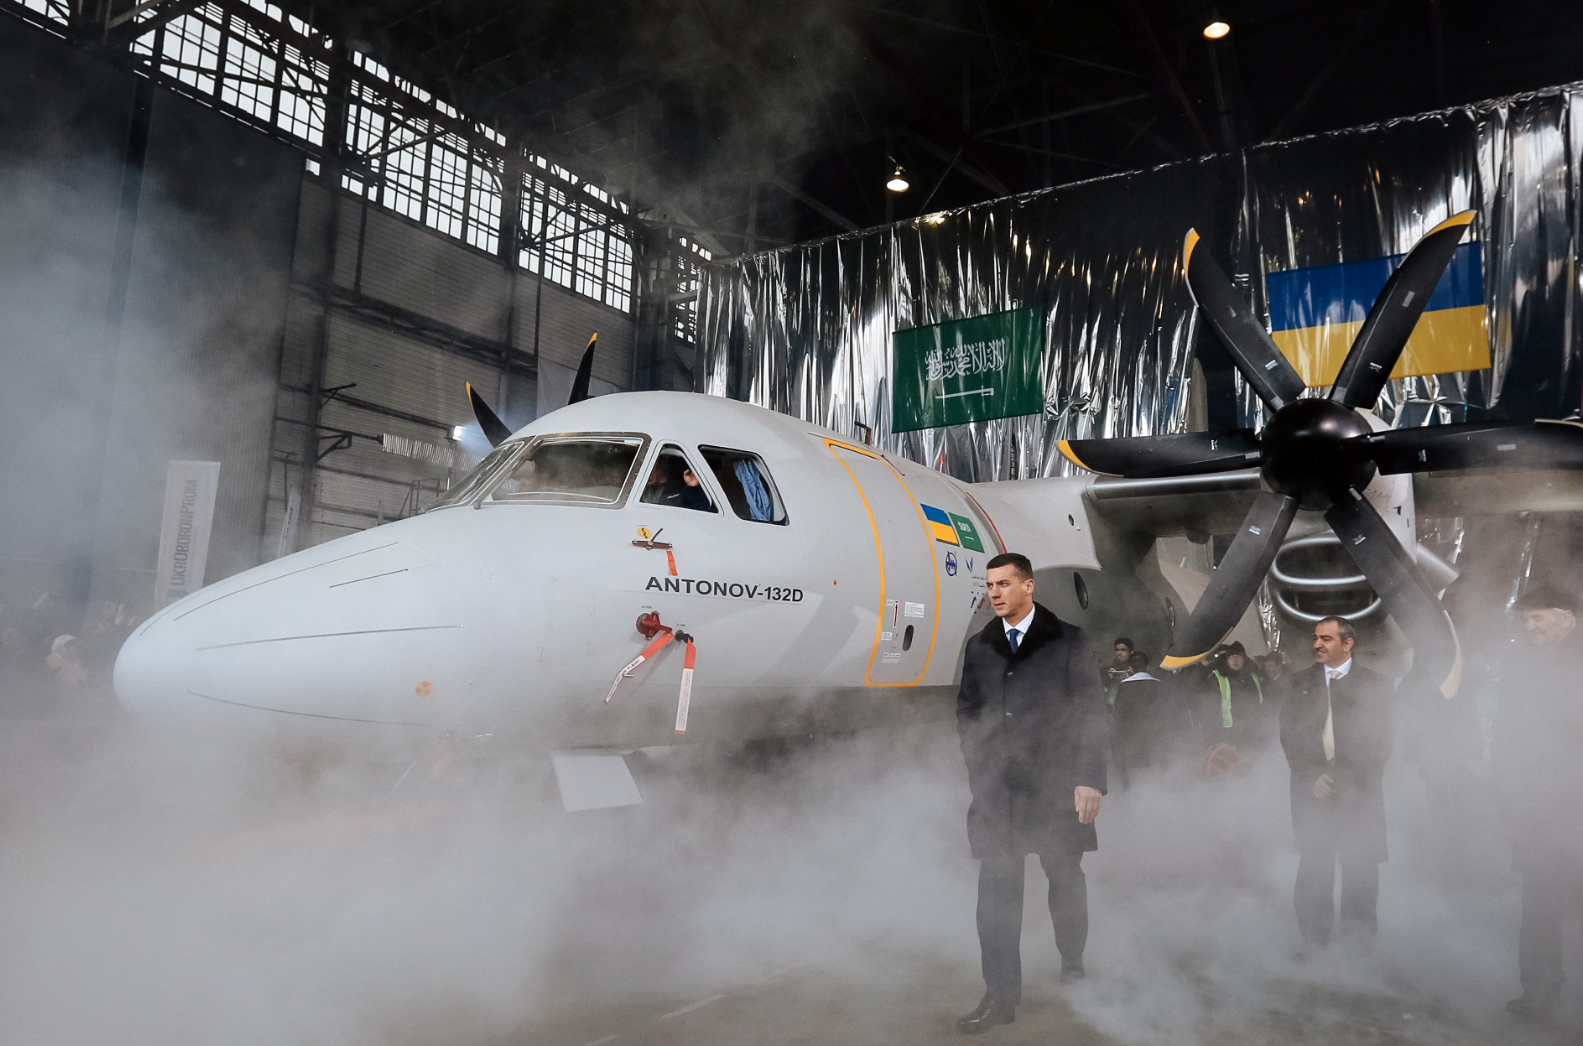 Guests attend the presentation of the new AN-132D aircraft demonstrator in the final assembly shop of the Antonov aircraft plant in Kiev, 20 December 2016. Source: Vostock-Photo